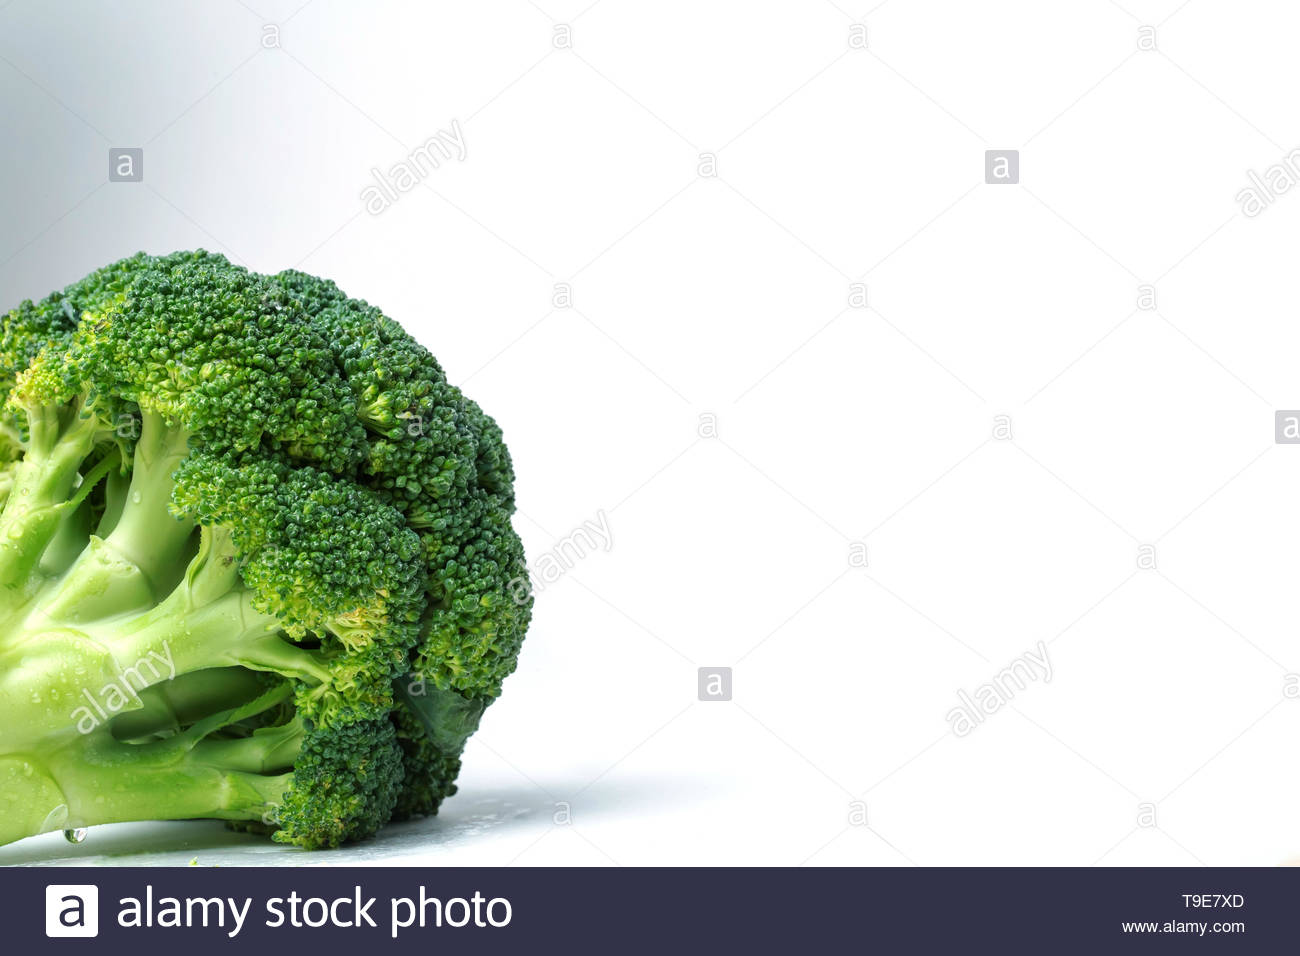 Green Broccoli On White Isolate Background In The Lower Left